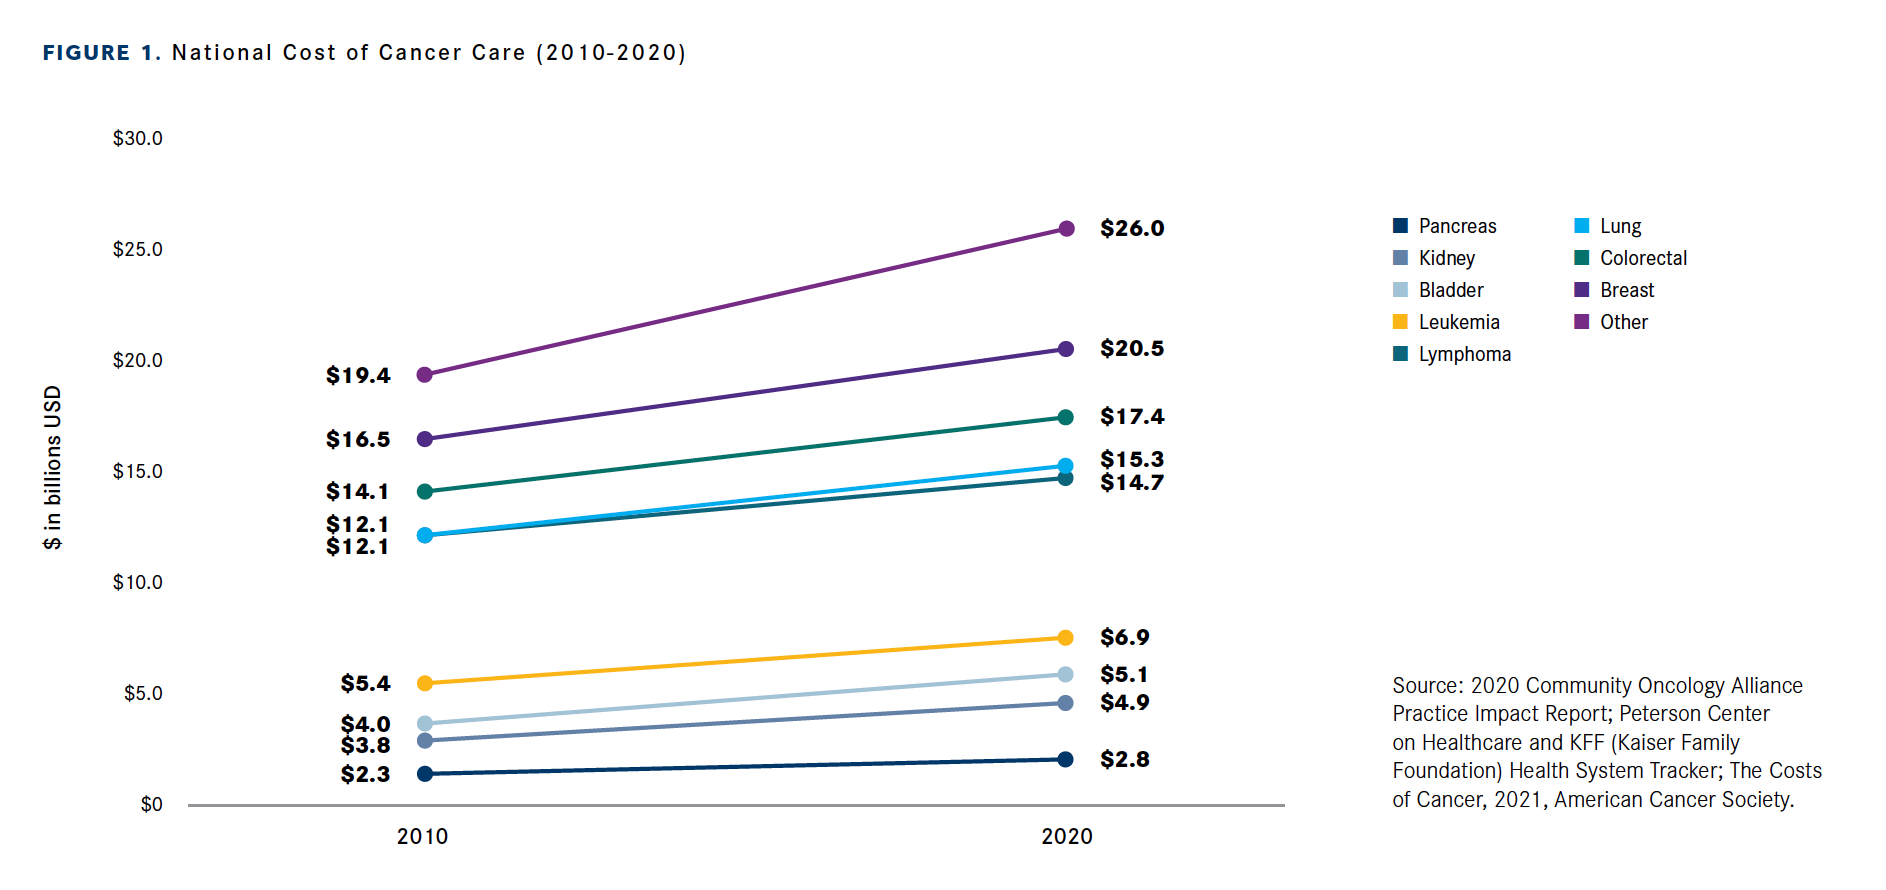 Figure 1. National Cost of Cancer Care (2010-2020)